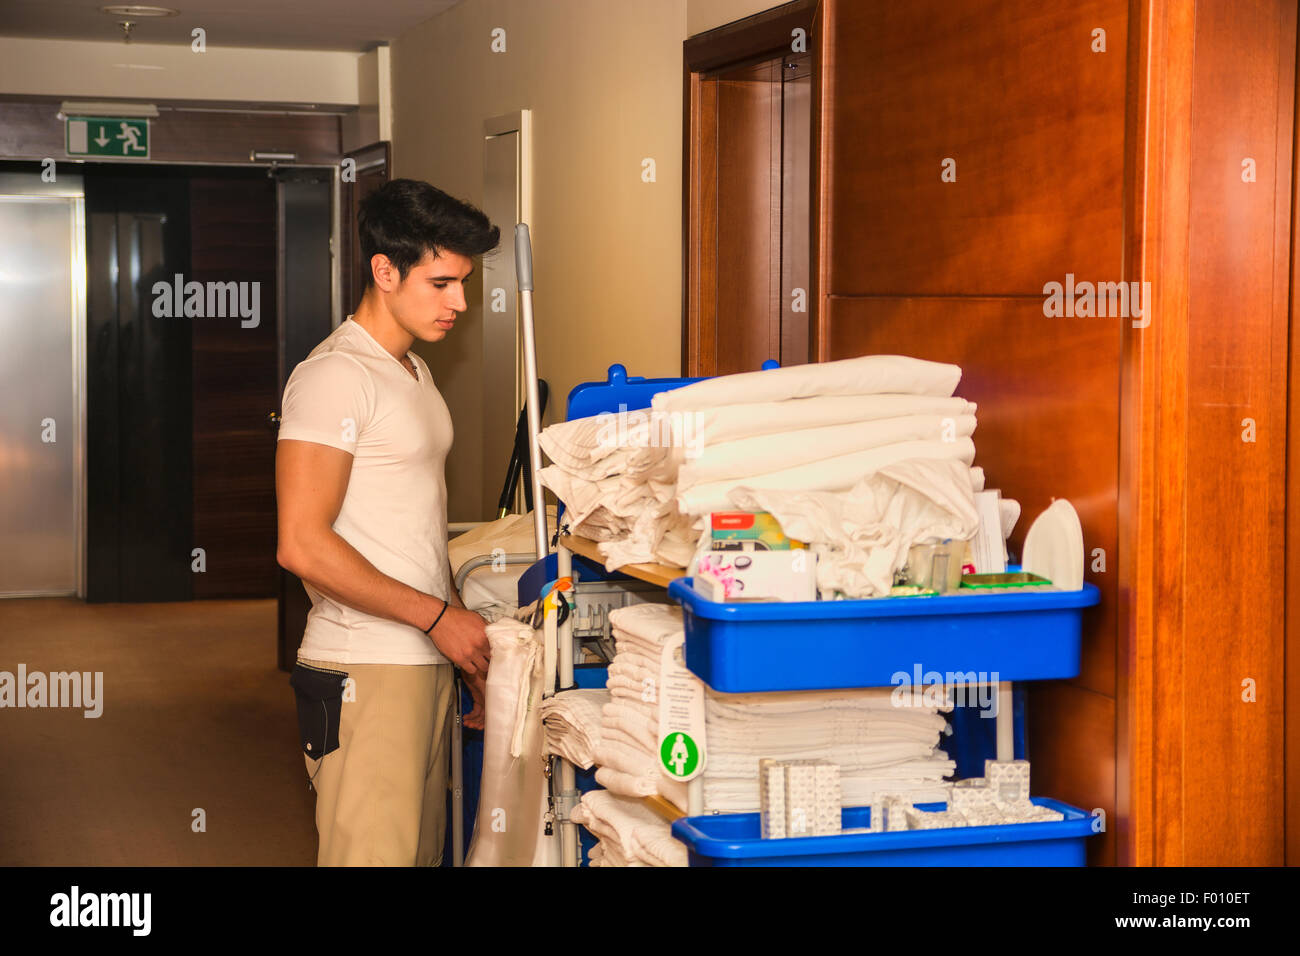 Young man pushing a housekeeping cart laden with clean towels, laundry and cleaning equipment in a hotel as he services the room Stock Photo